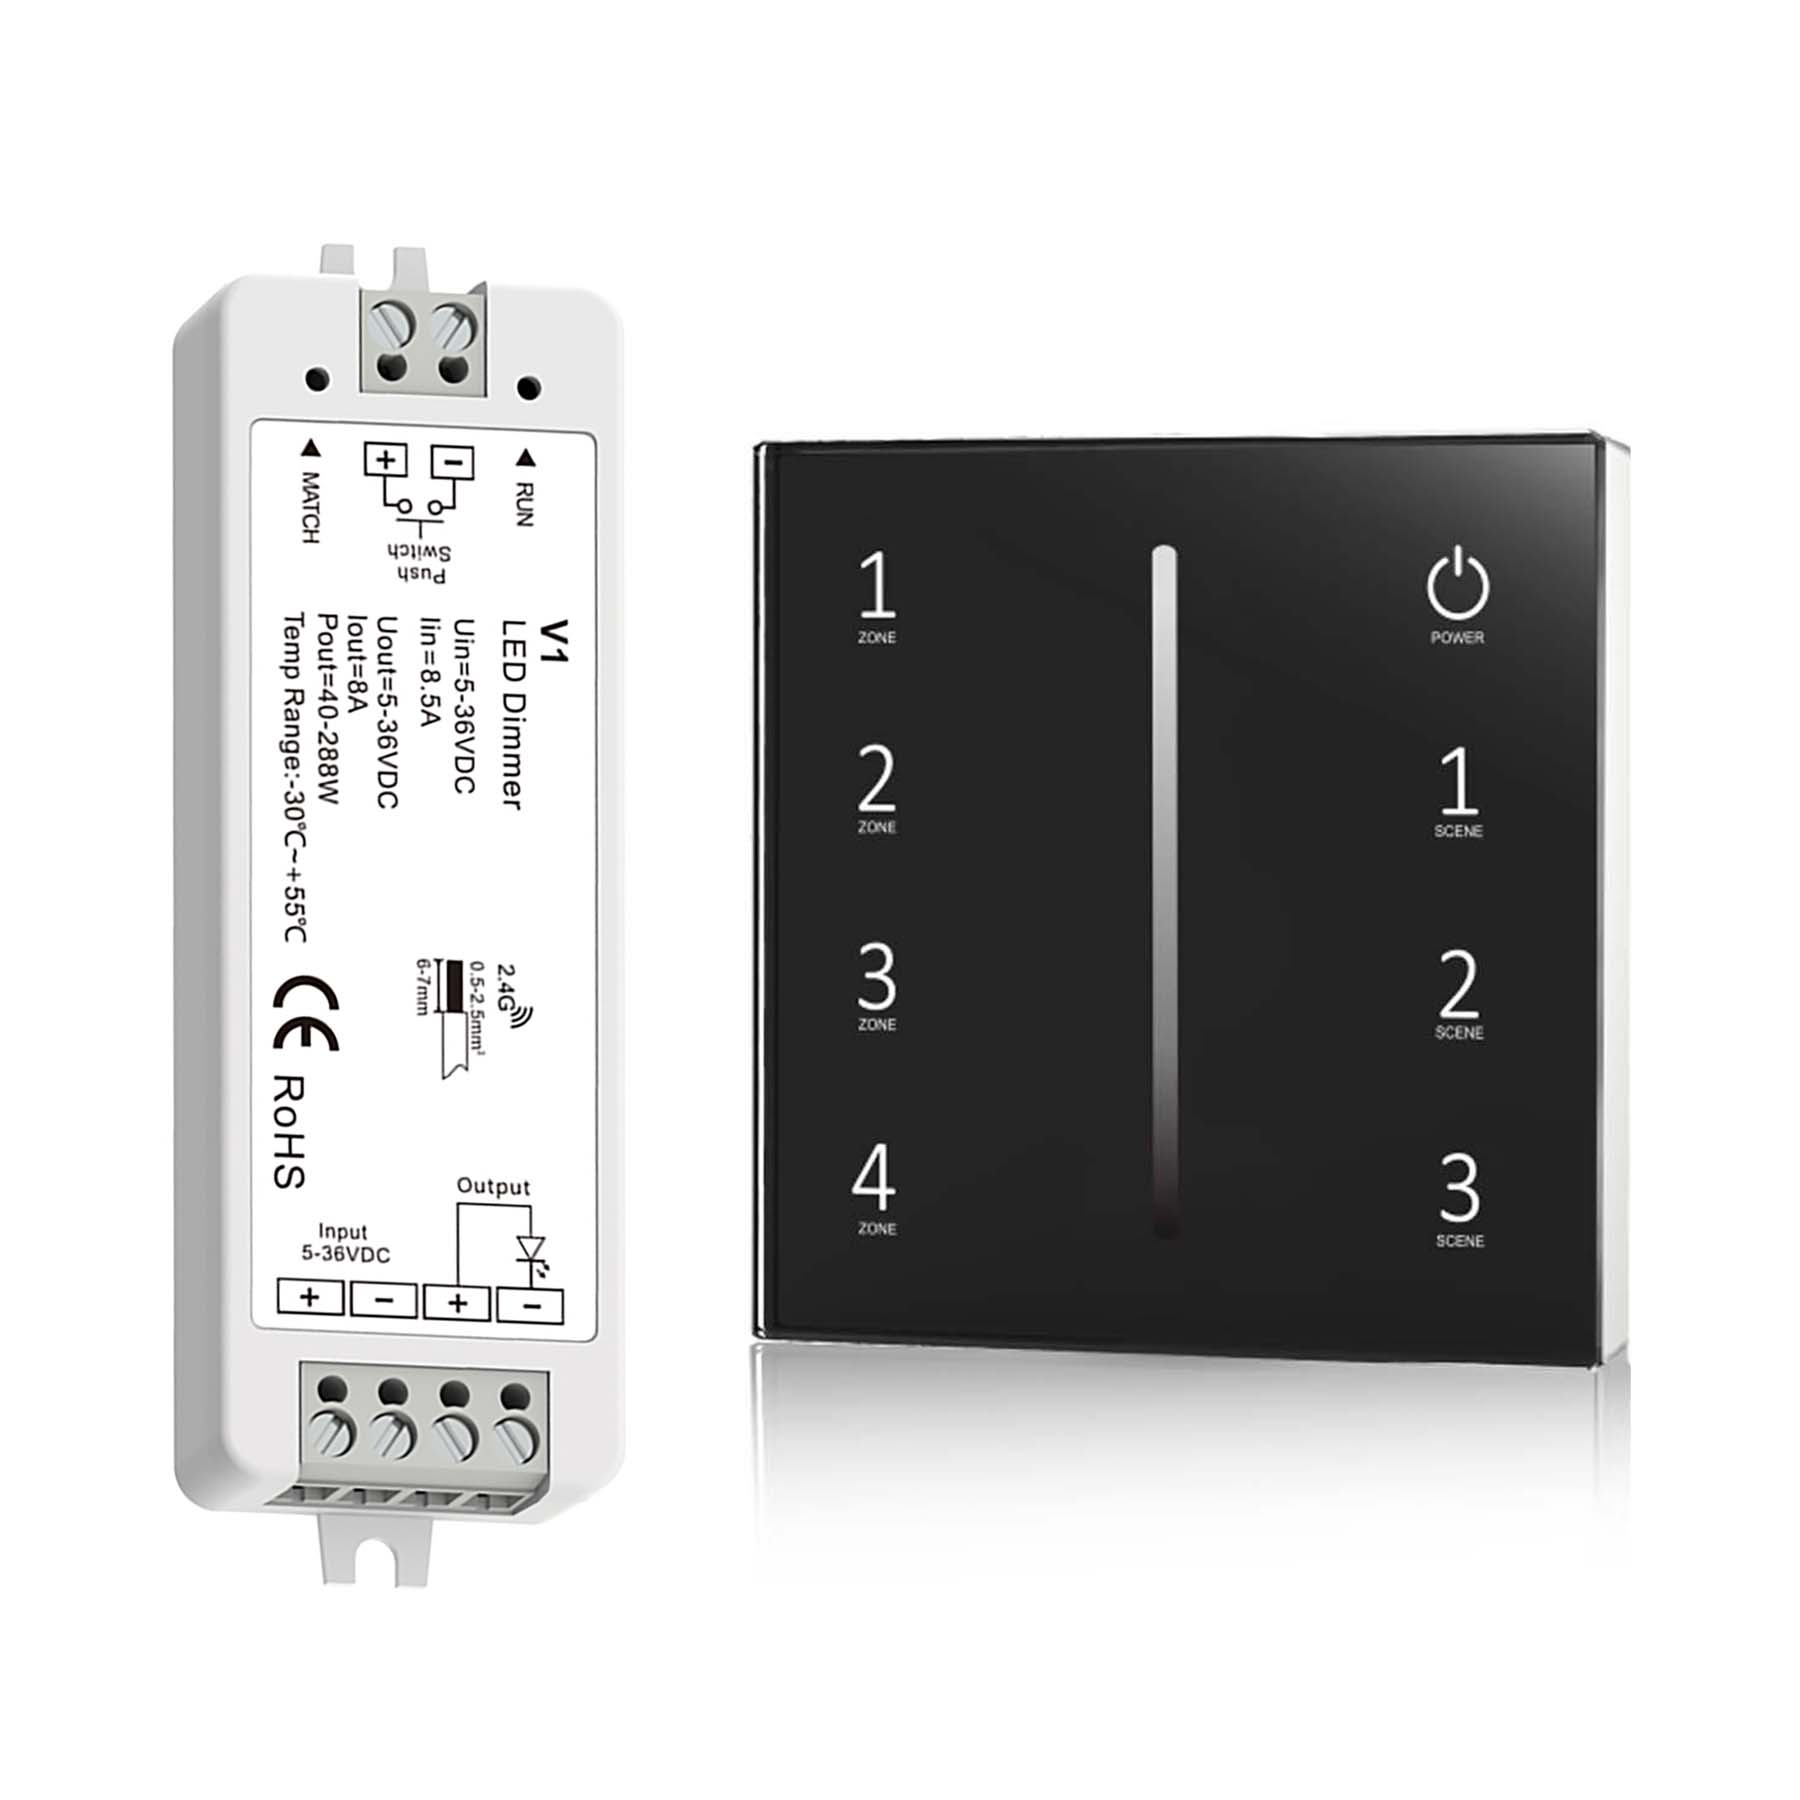 G.W.S. LED Black LED 5-36V DC Dimming Controller V1 + 4 Zone Panel Remote Control 2*AAA Battery T21